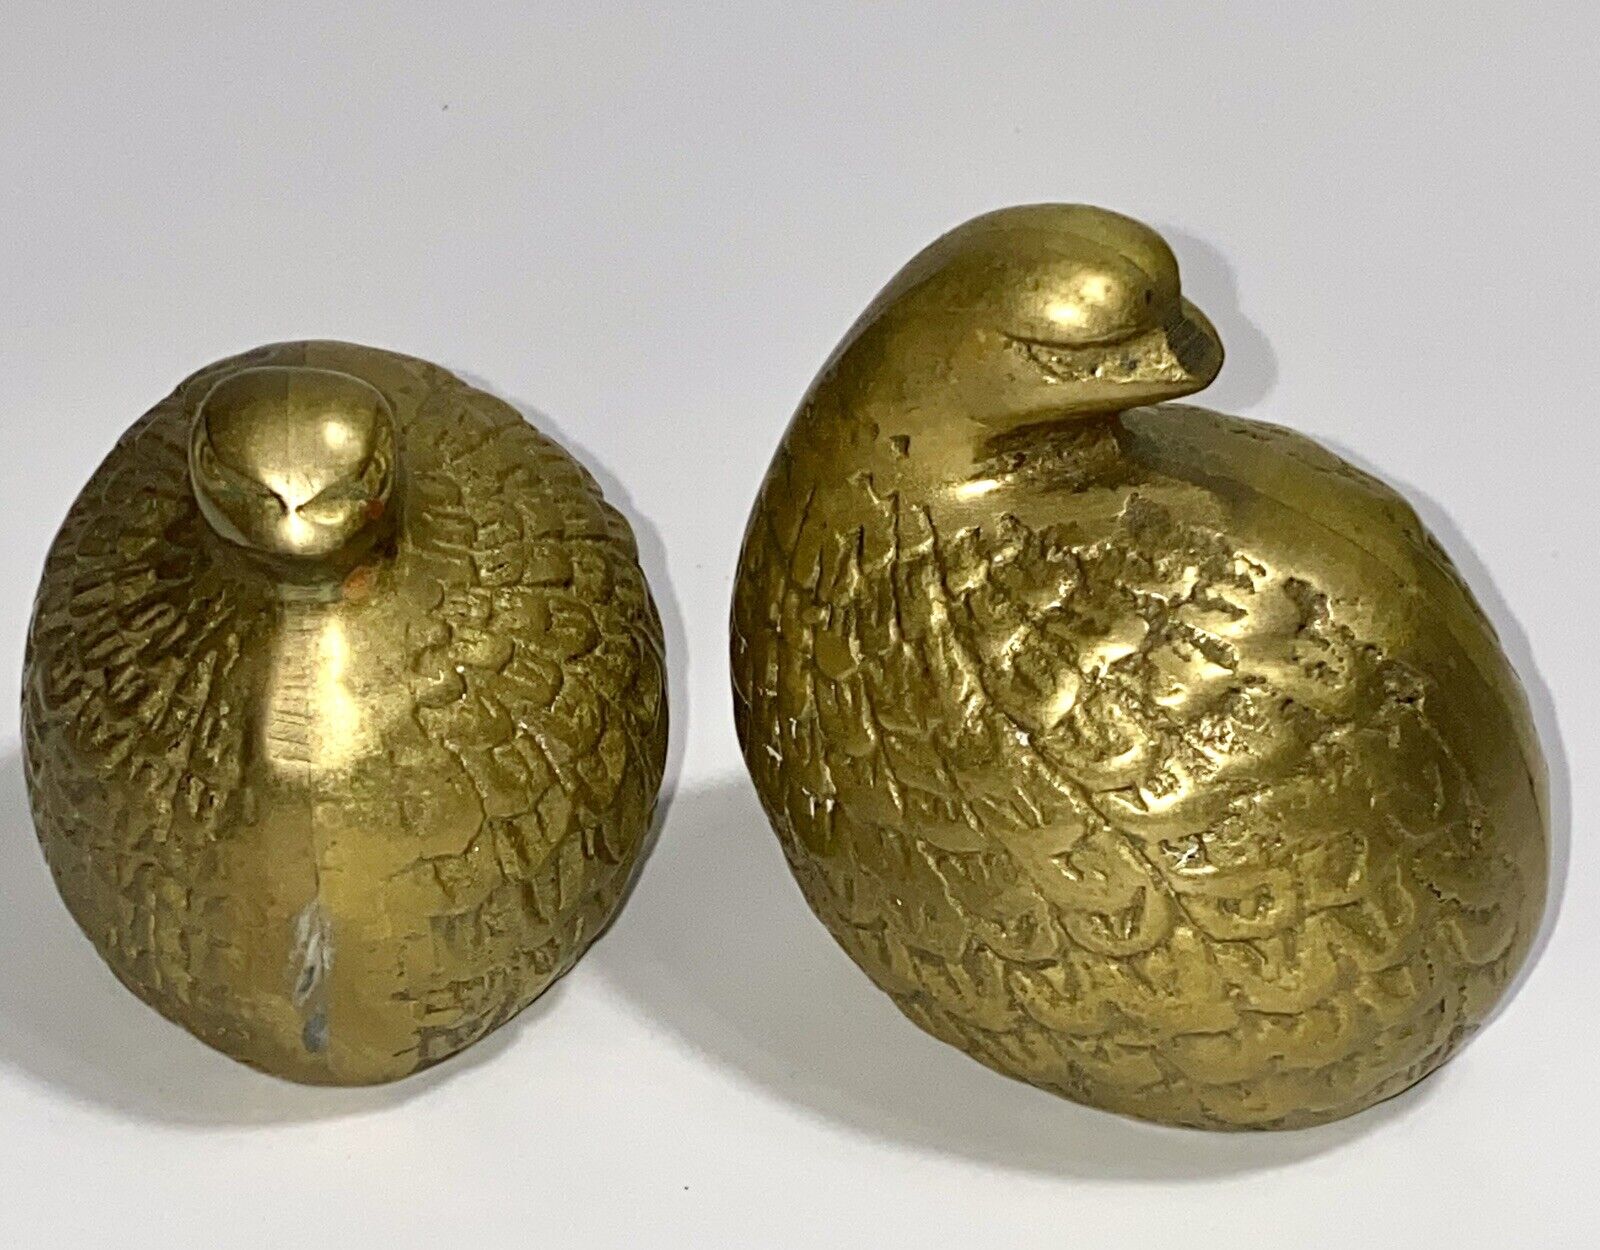 Vintage Solid Brass Quail Figurines Or Paperweight Mid Century